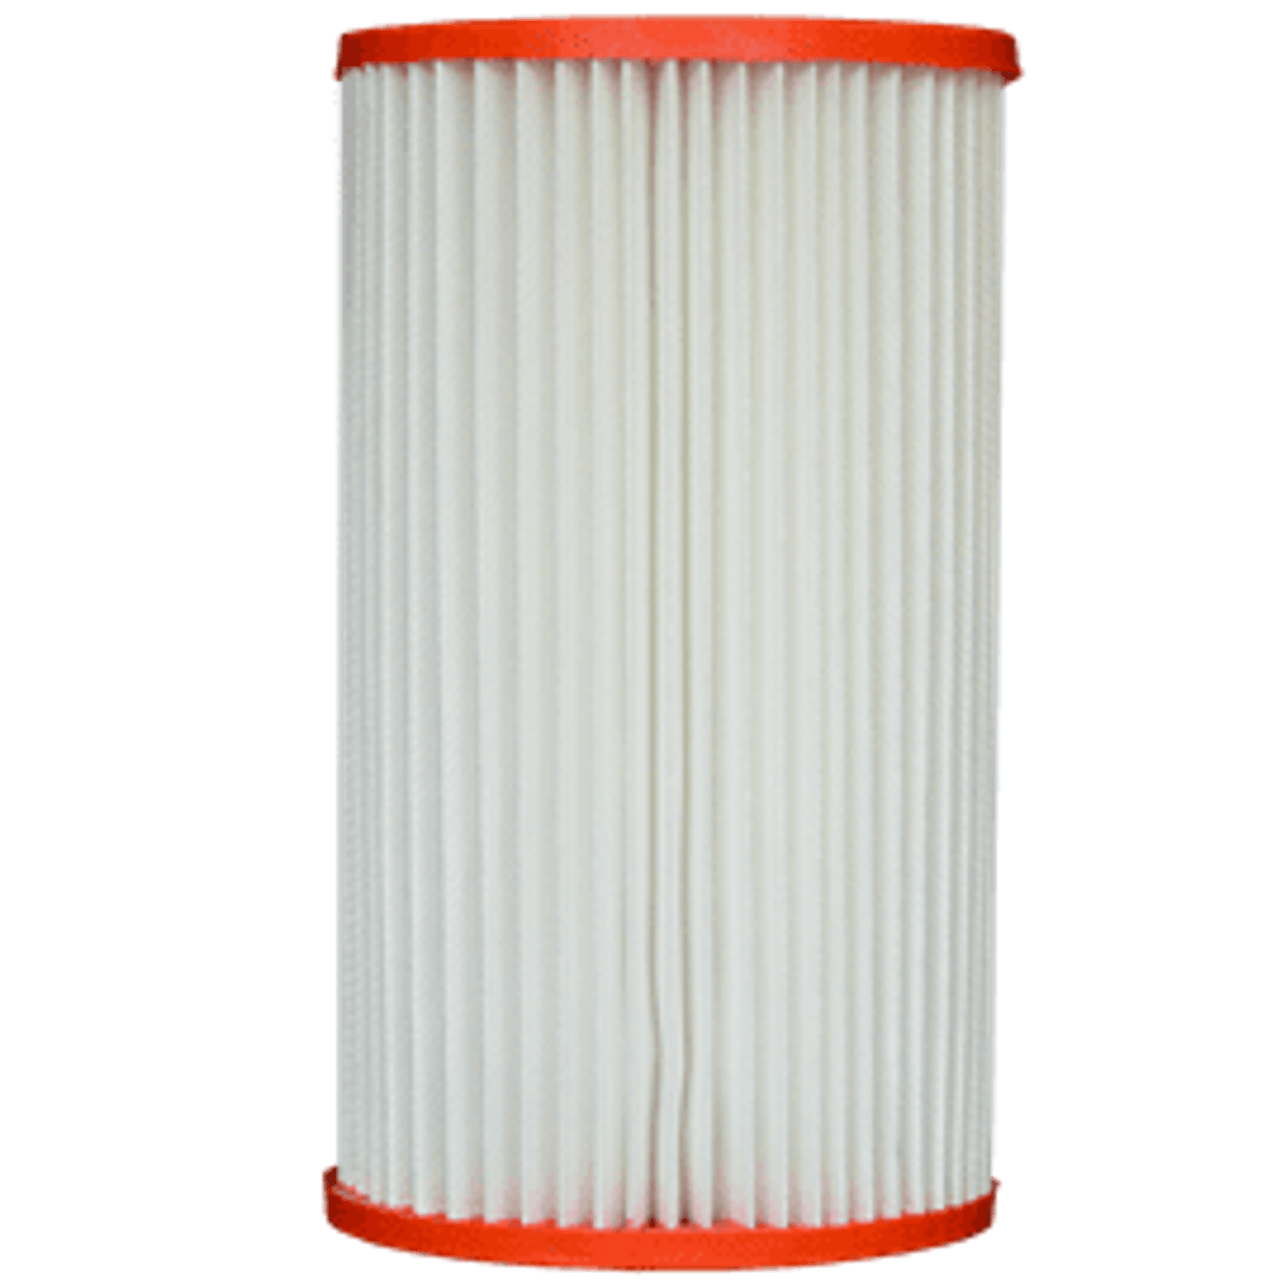 Pleatco PMS8 Filter Cartridge Replaces C-4605, AK-3037 and FC-3810